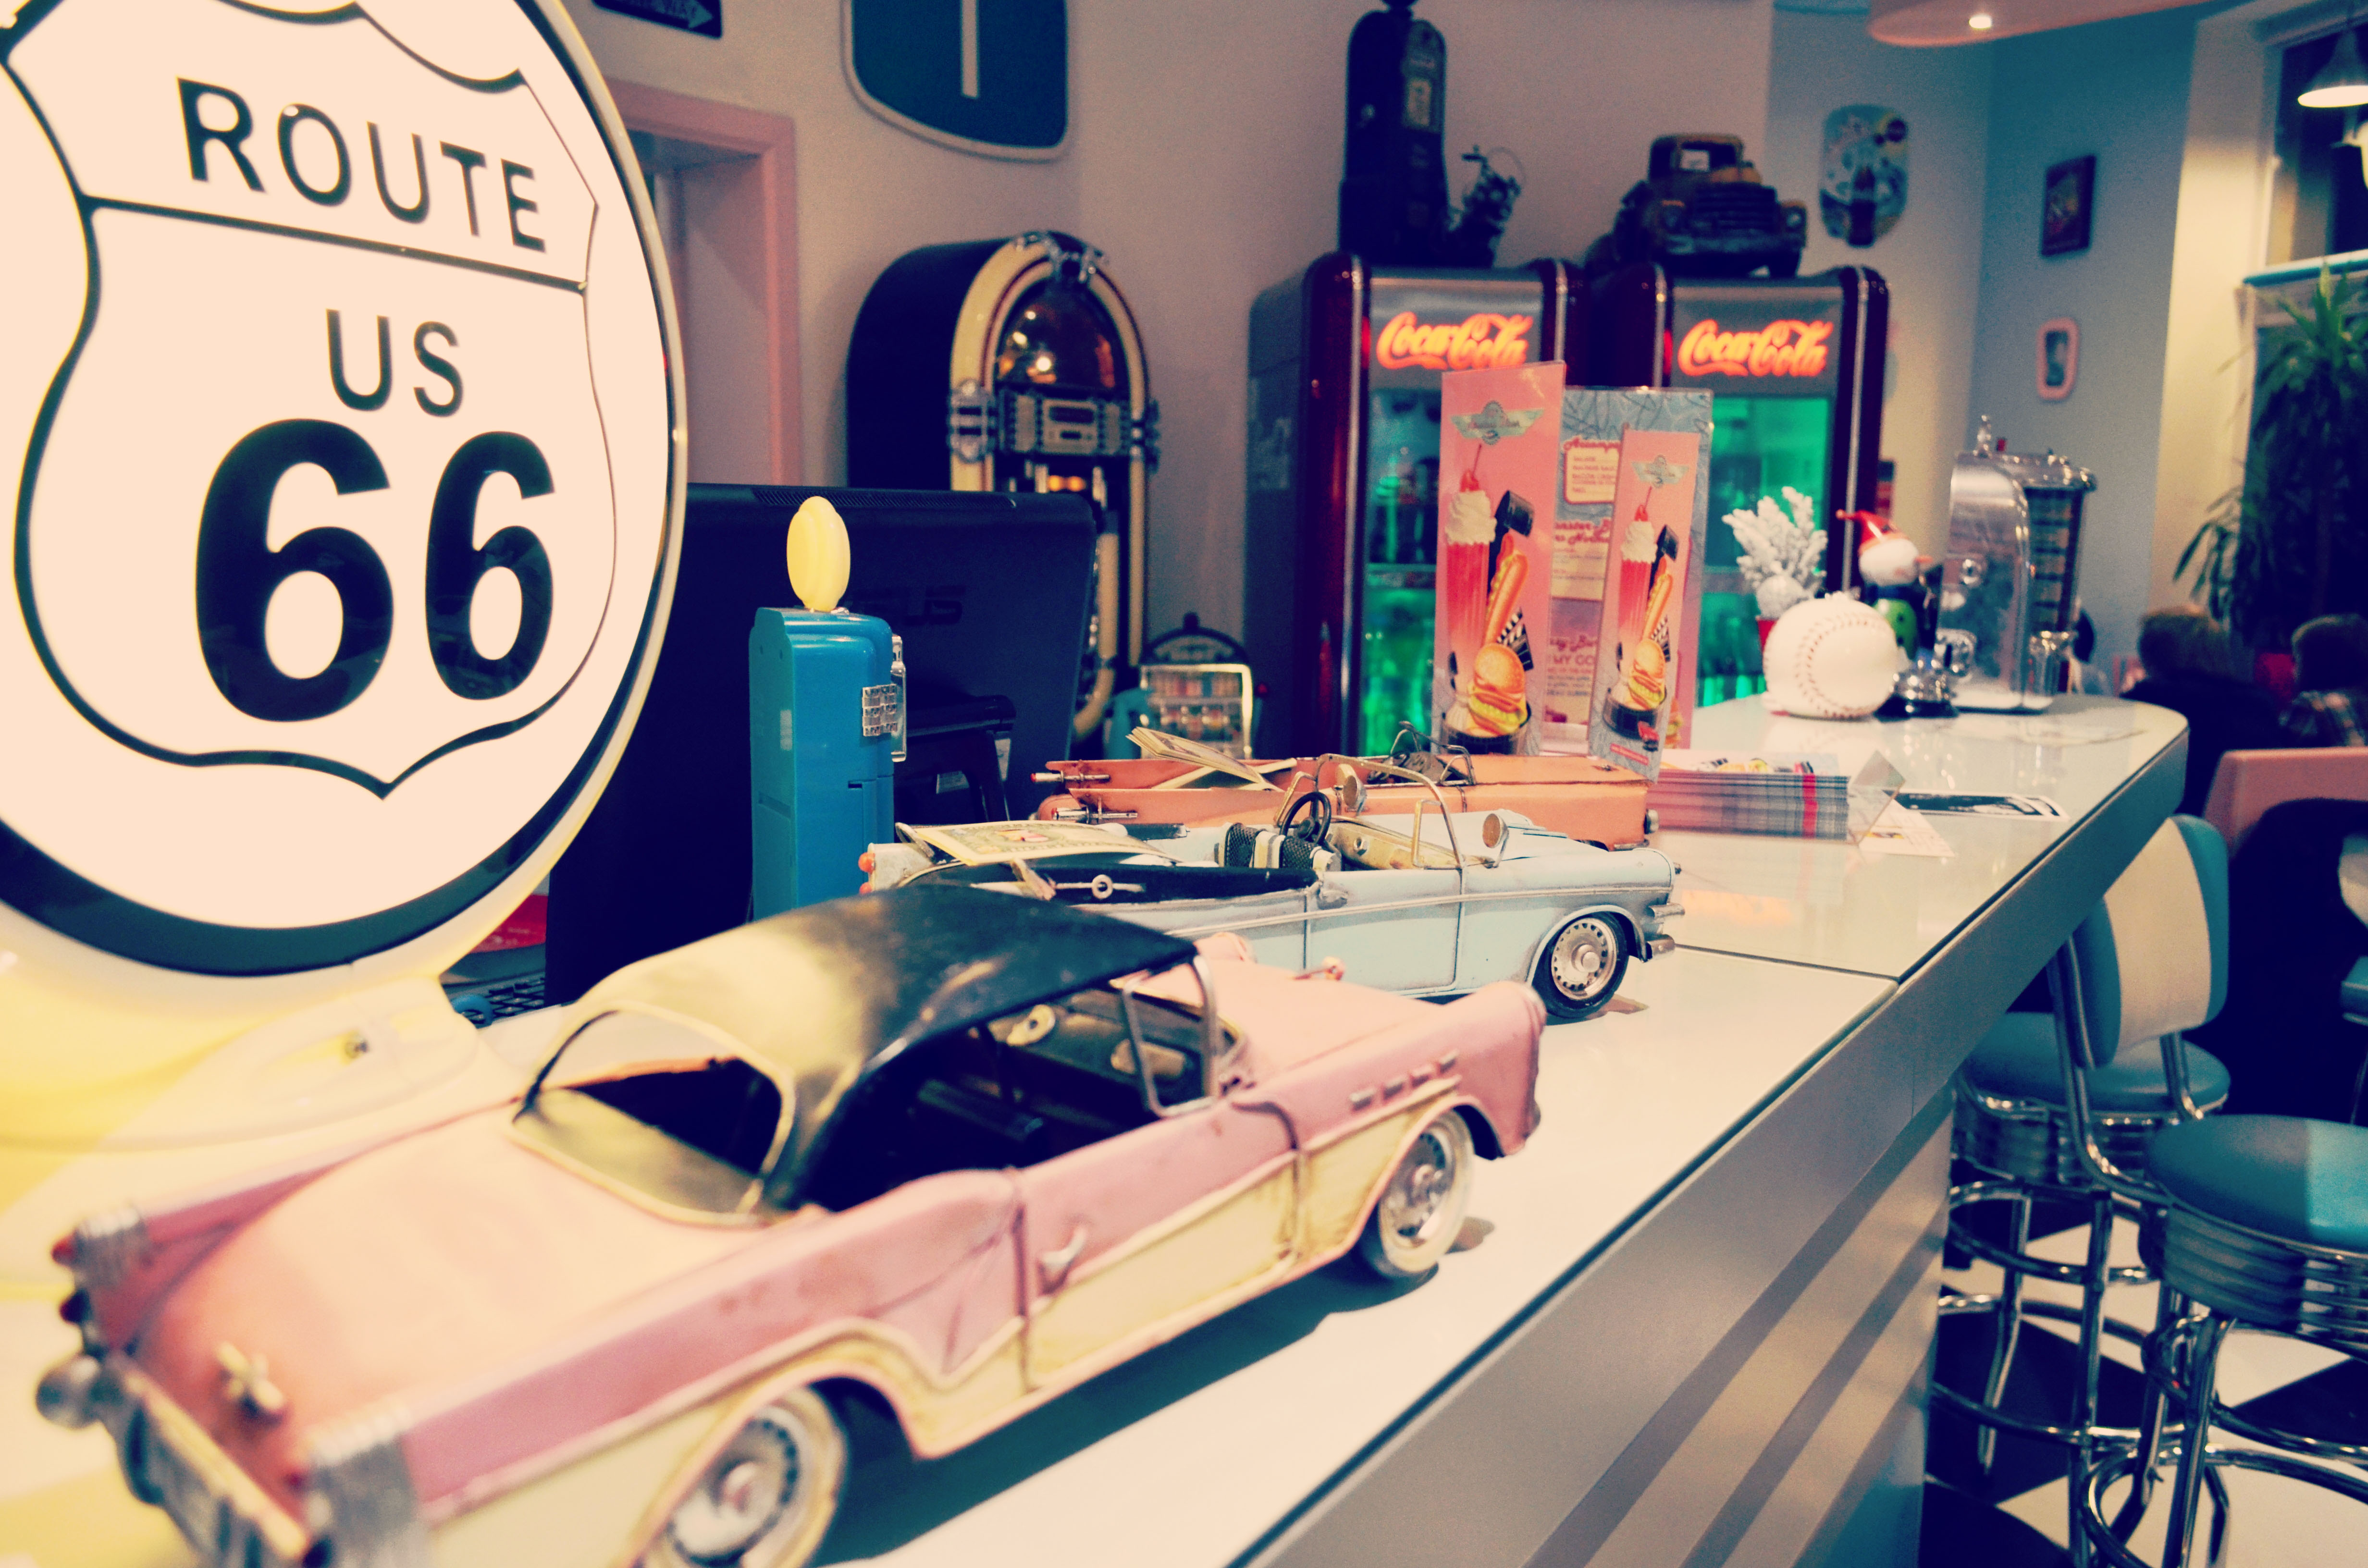 50's American Diner